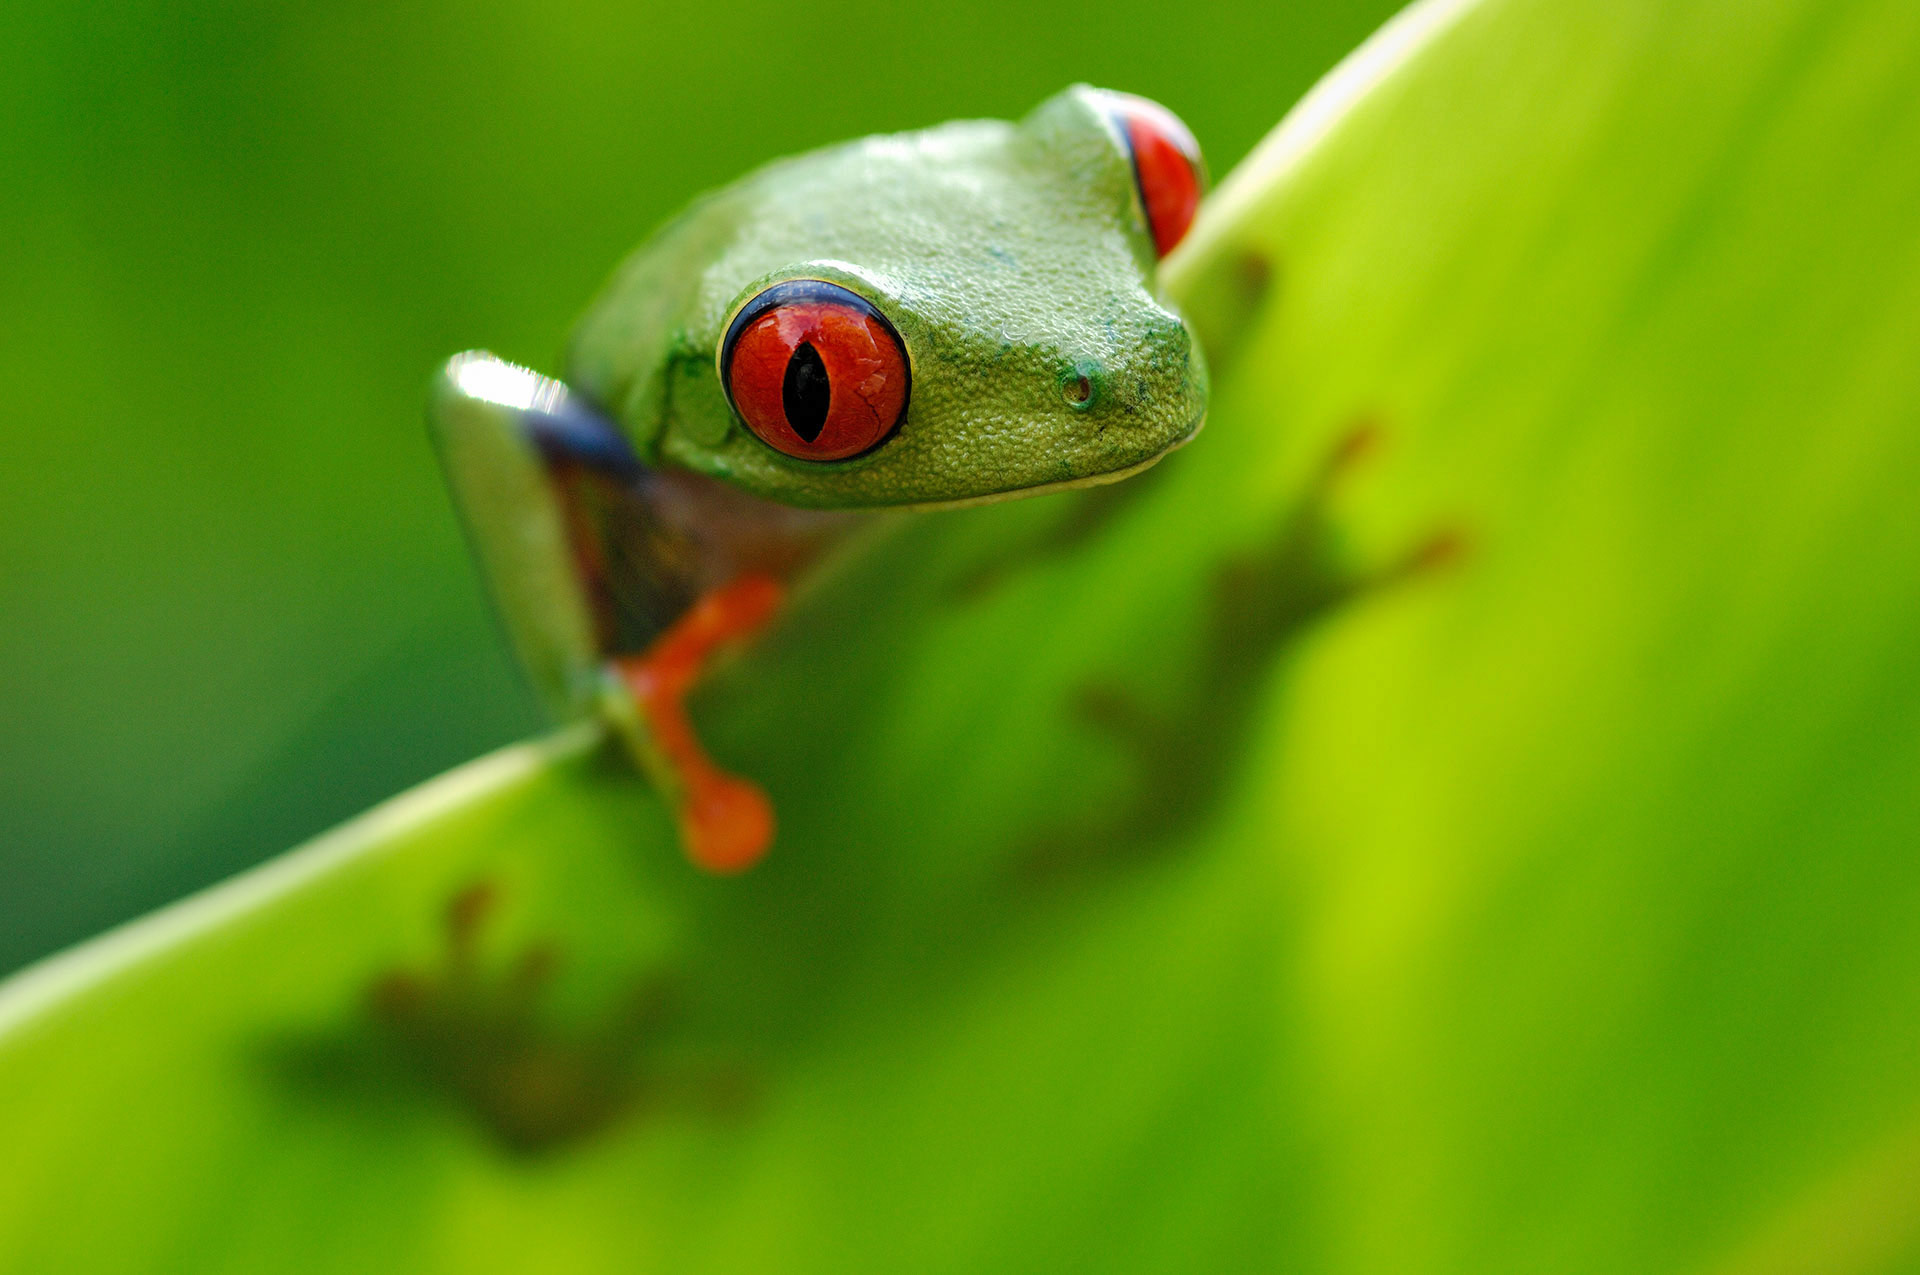 A red-eyed tree frog on a banana leaf.